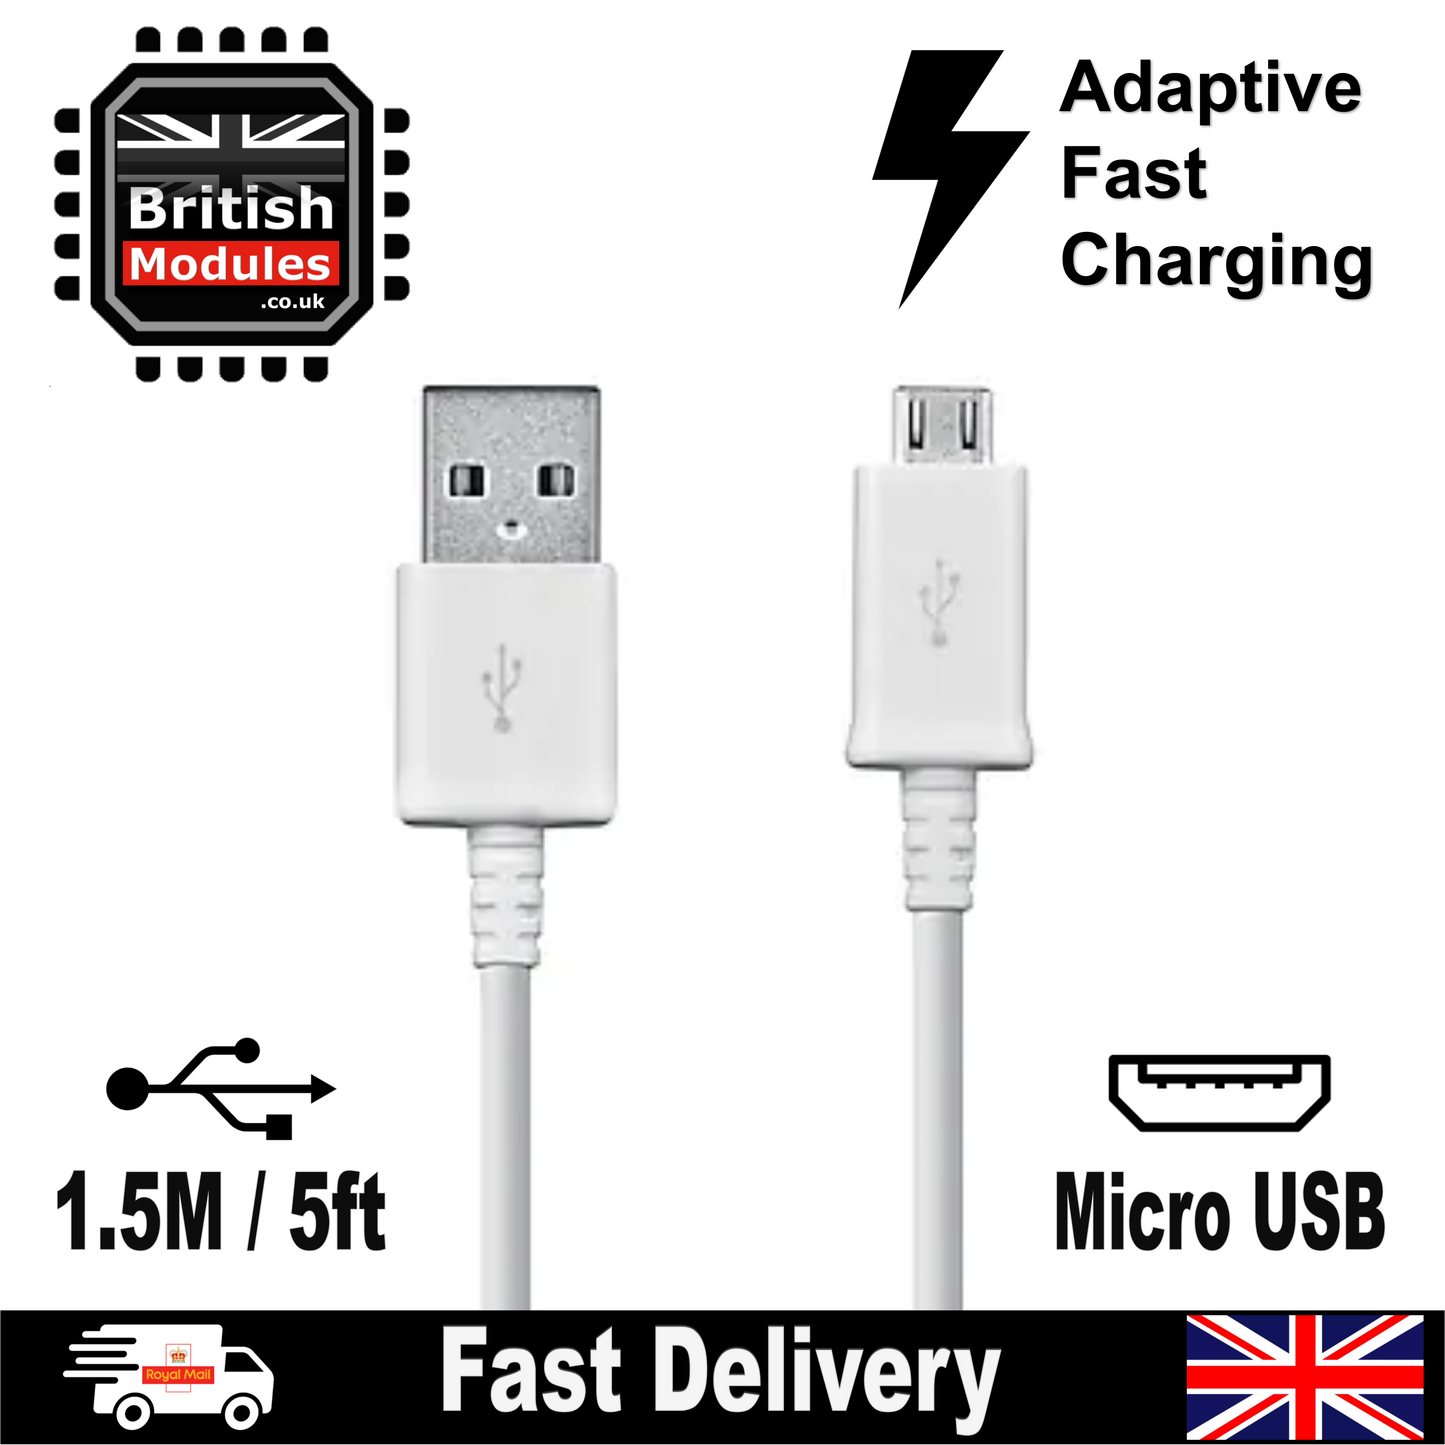 Official Samsung Micro USB Data Charger Cable for Samsung Galaxy S7, S6, S5, S4, S3, Note 4, Note 5 ECB-DU4 1.5M